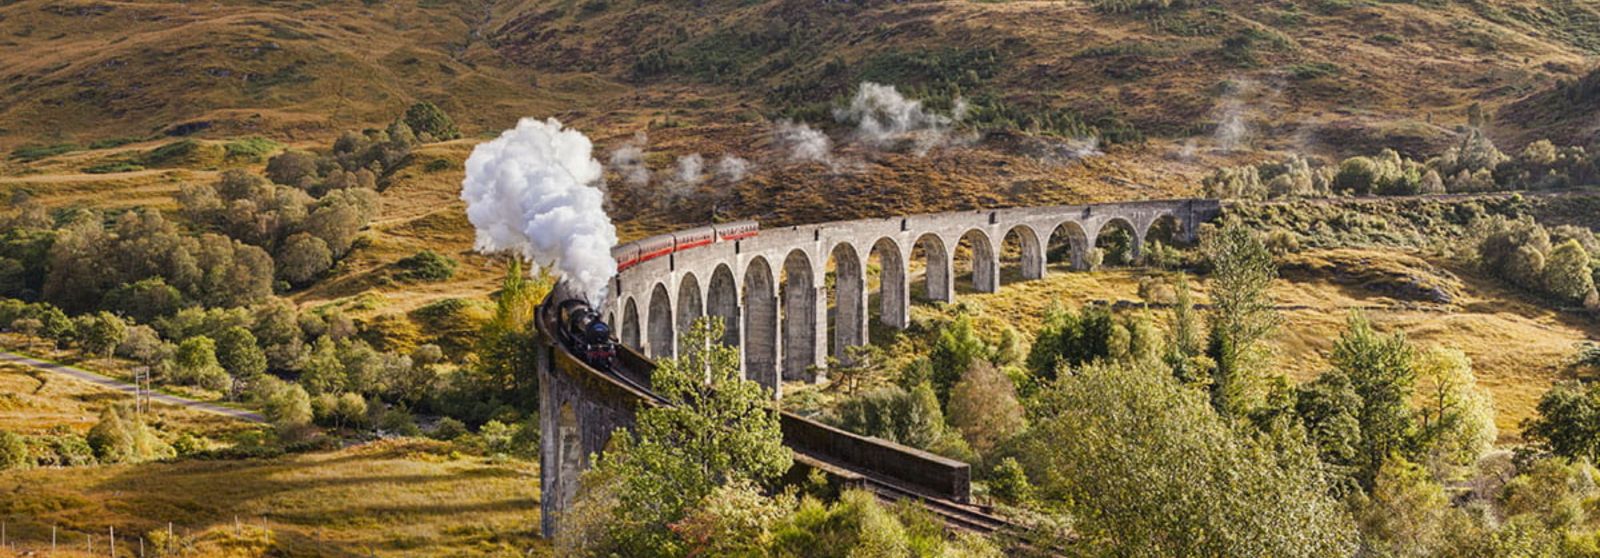 winter train journeys, The Jacobite Steam Train going over the famous Harry Potter Bridge in Scotland